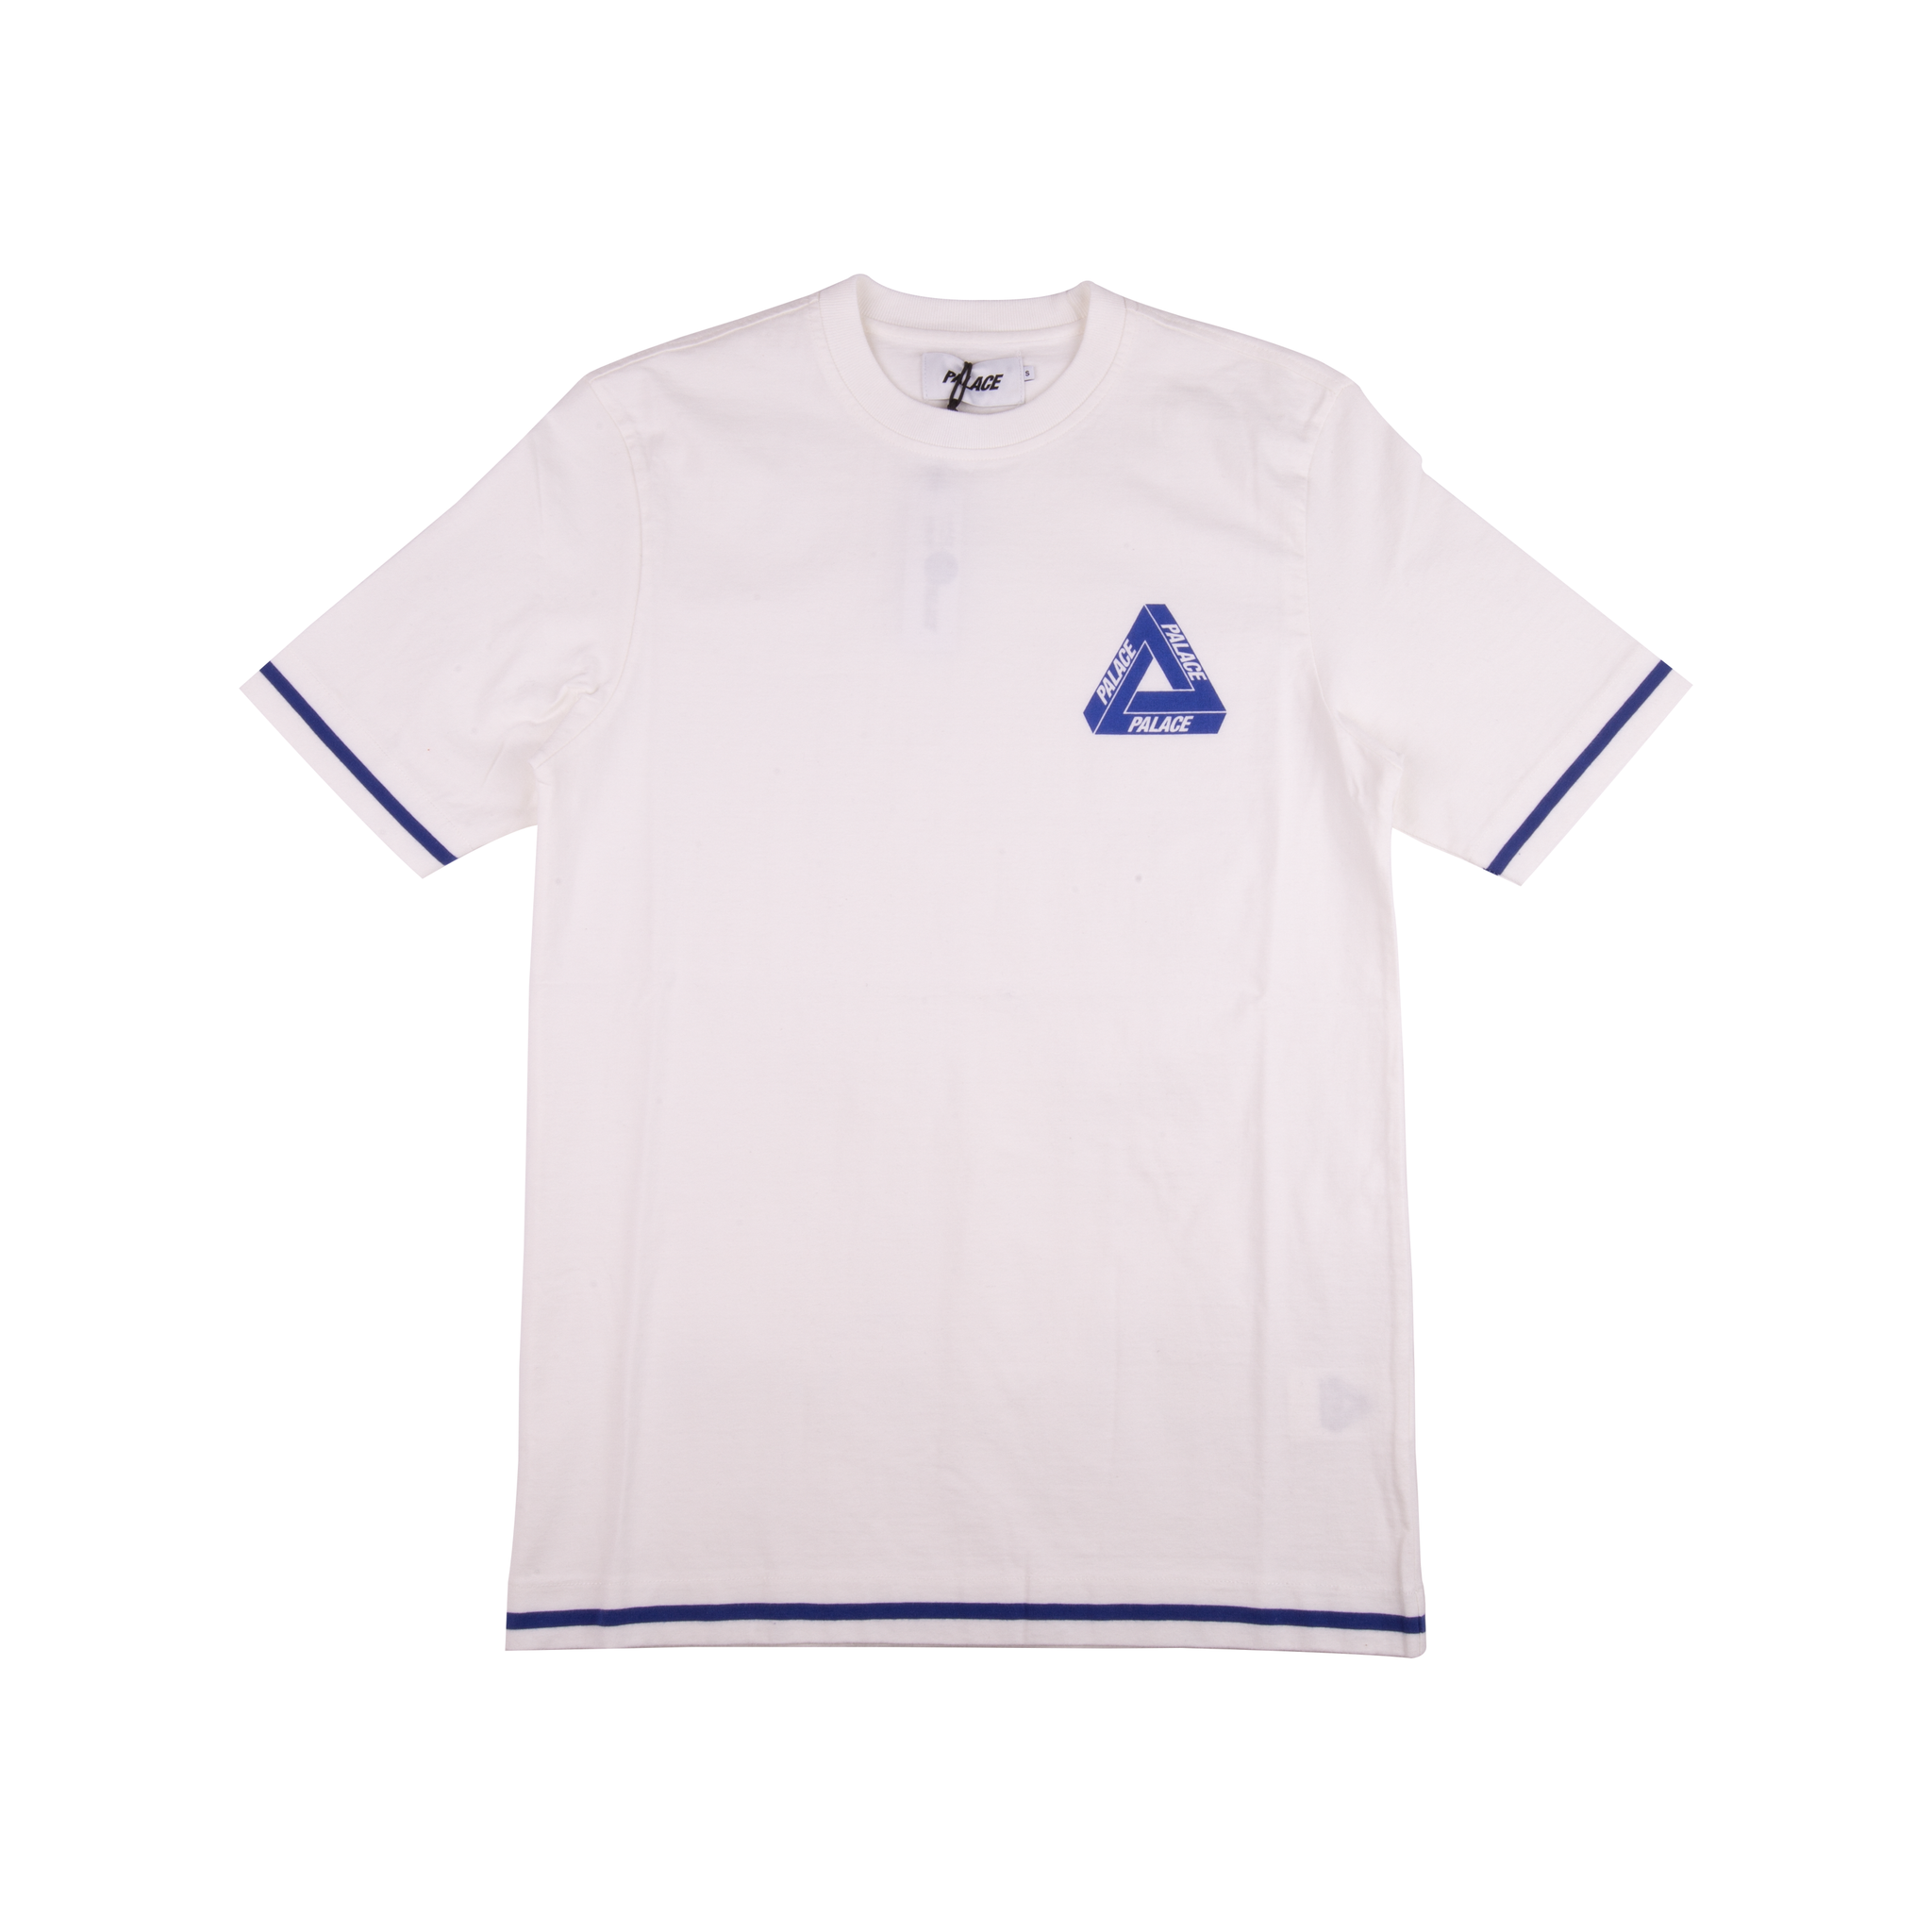 Palace White CH Tee